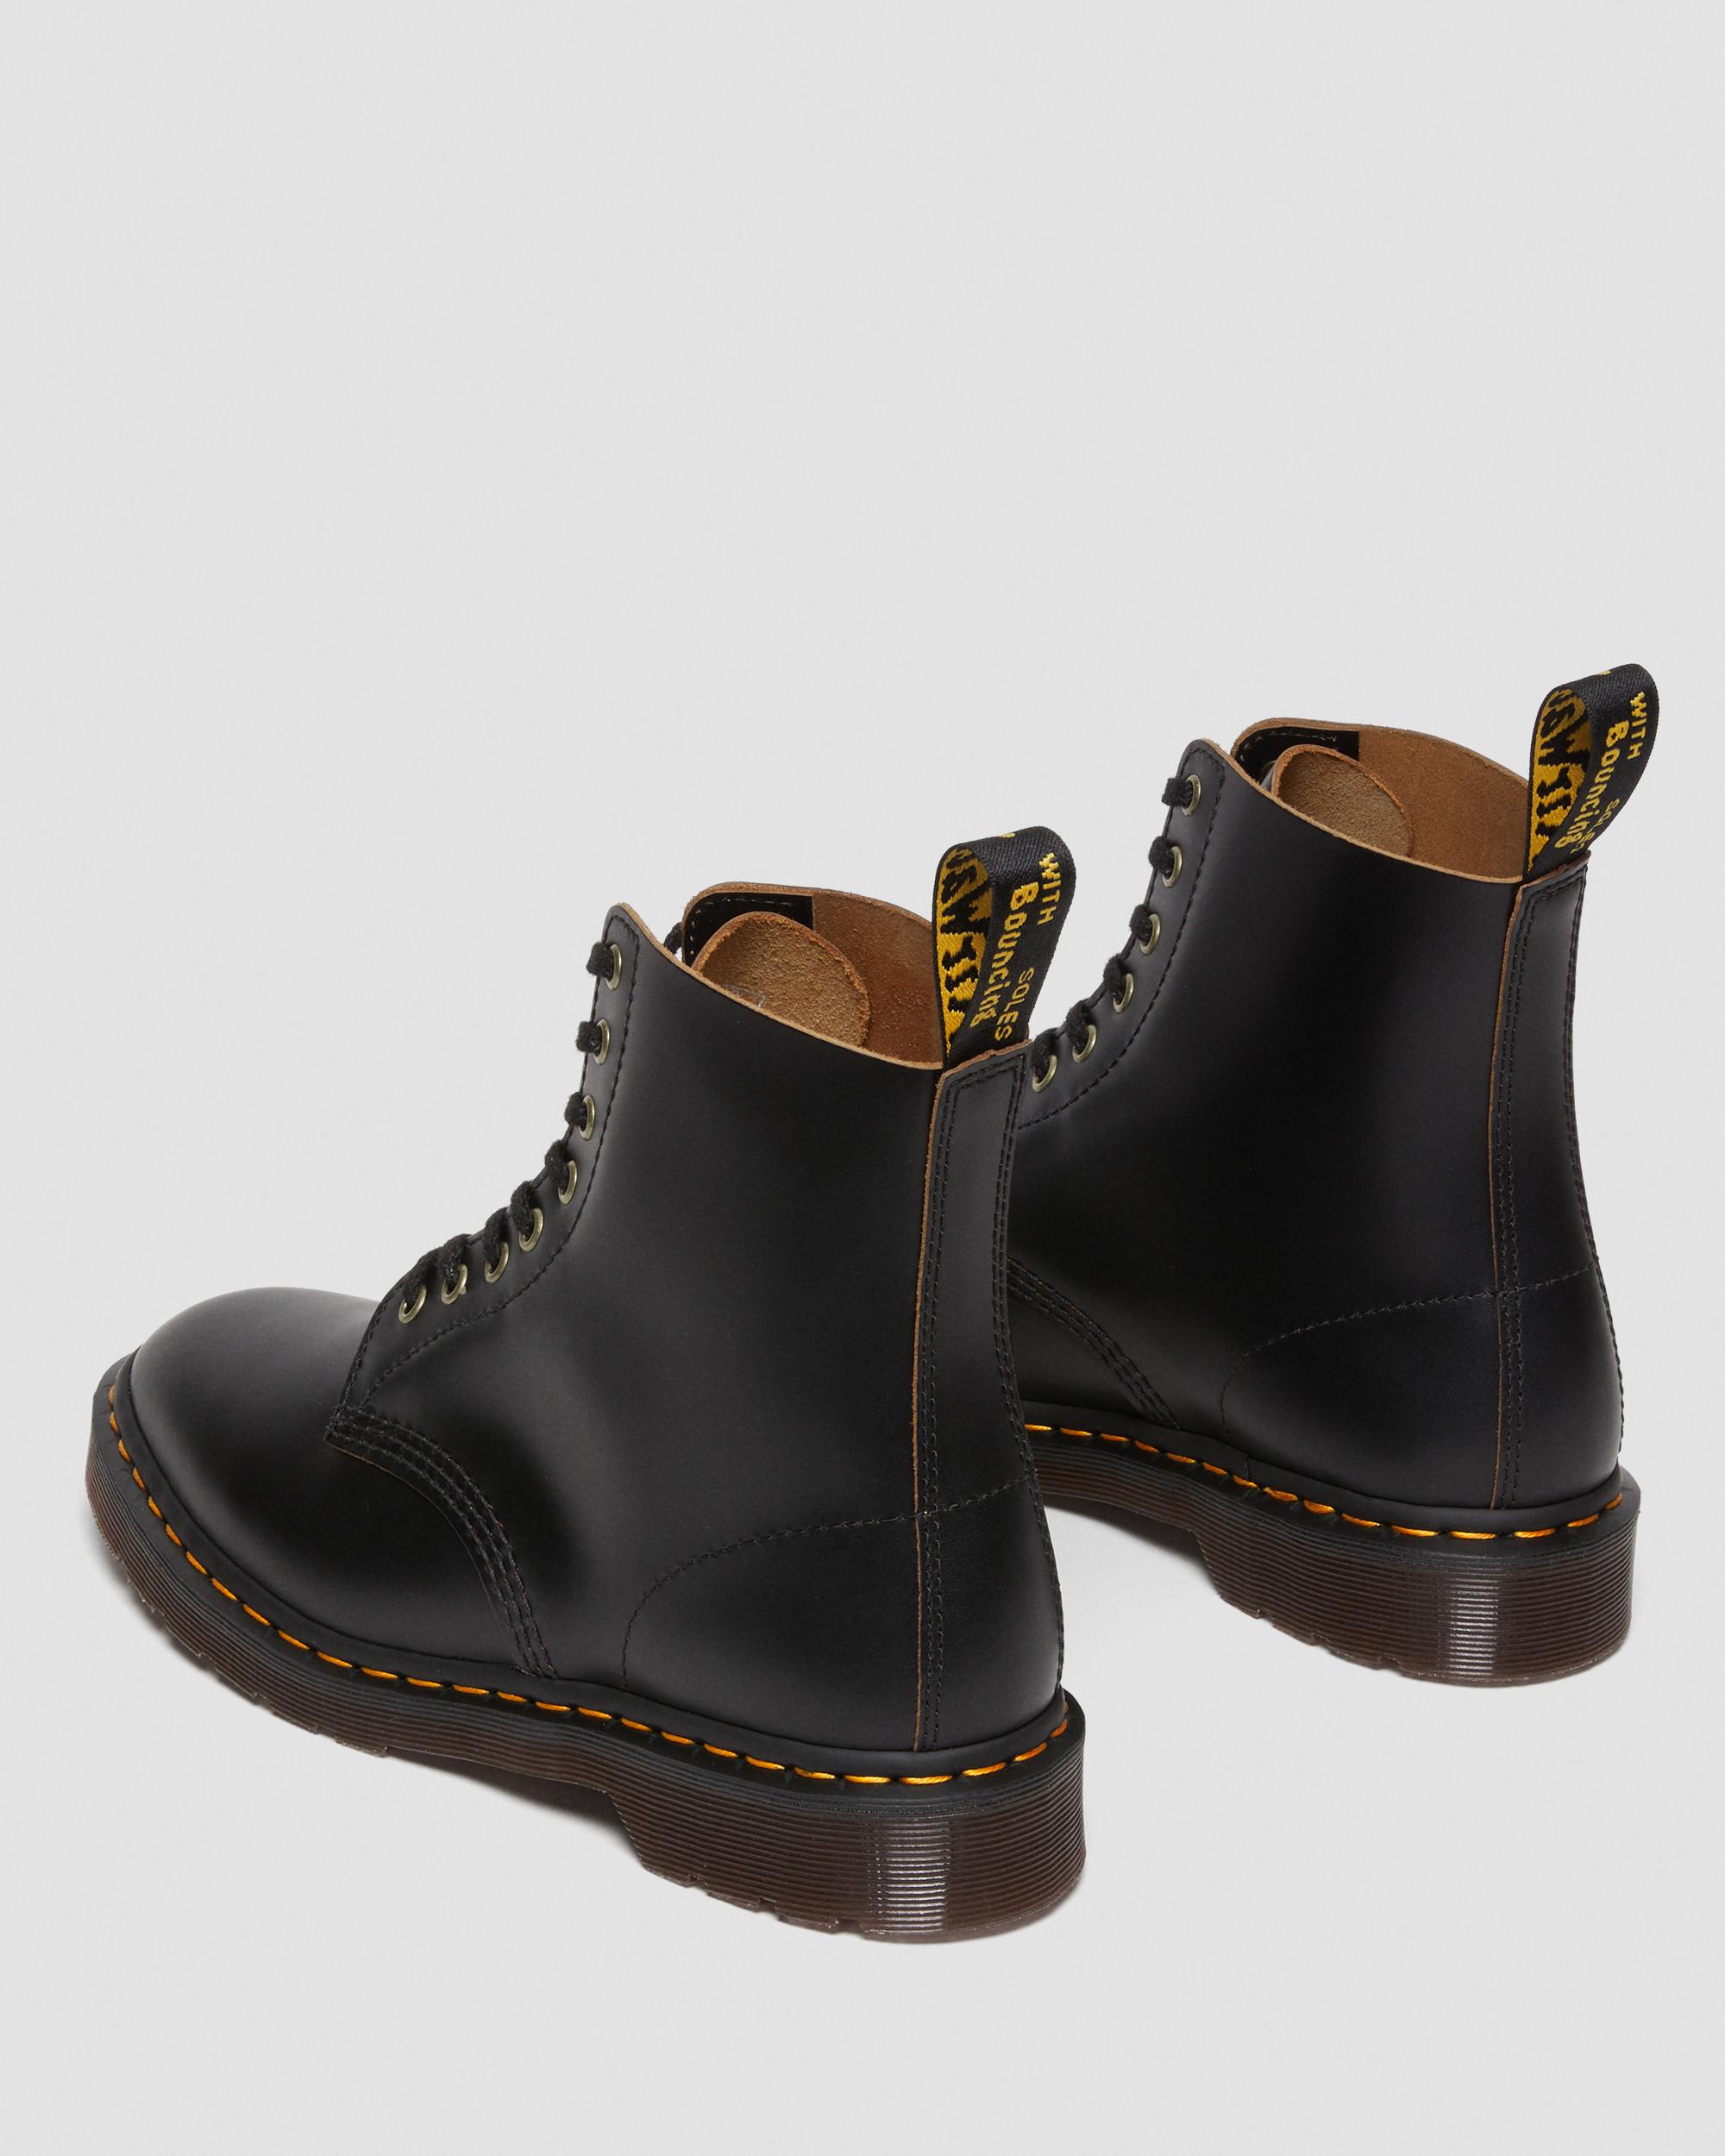 Chaussures Smiths en cuir Vintage SmoothBoots Smiths en cuir Vintage Smooth Dr. Martens